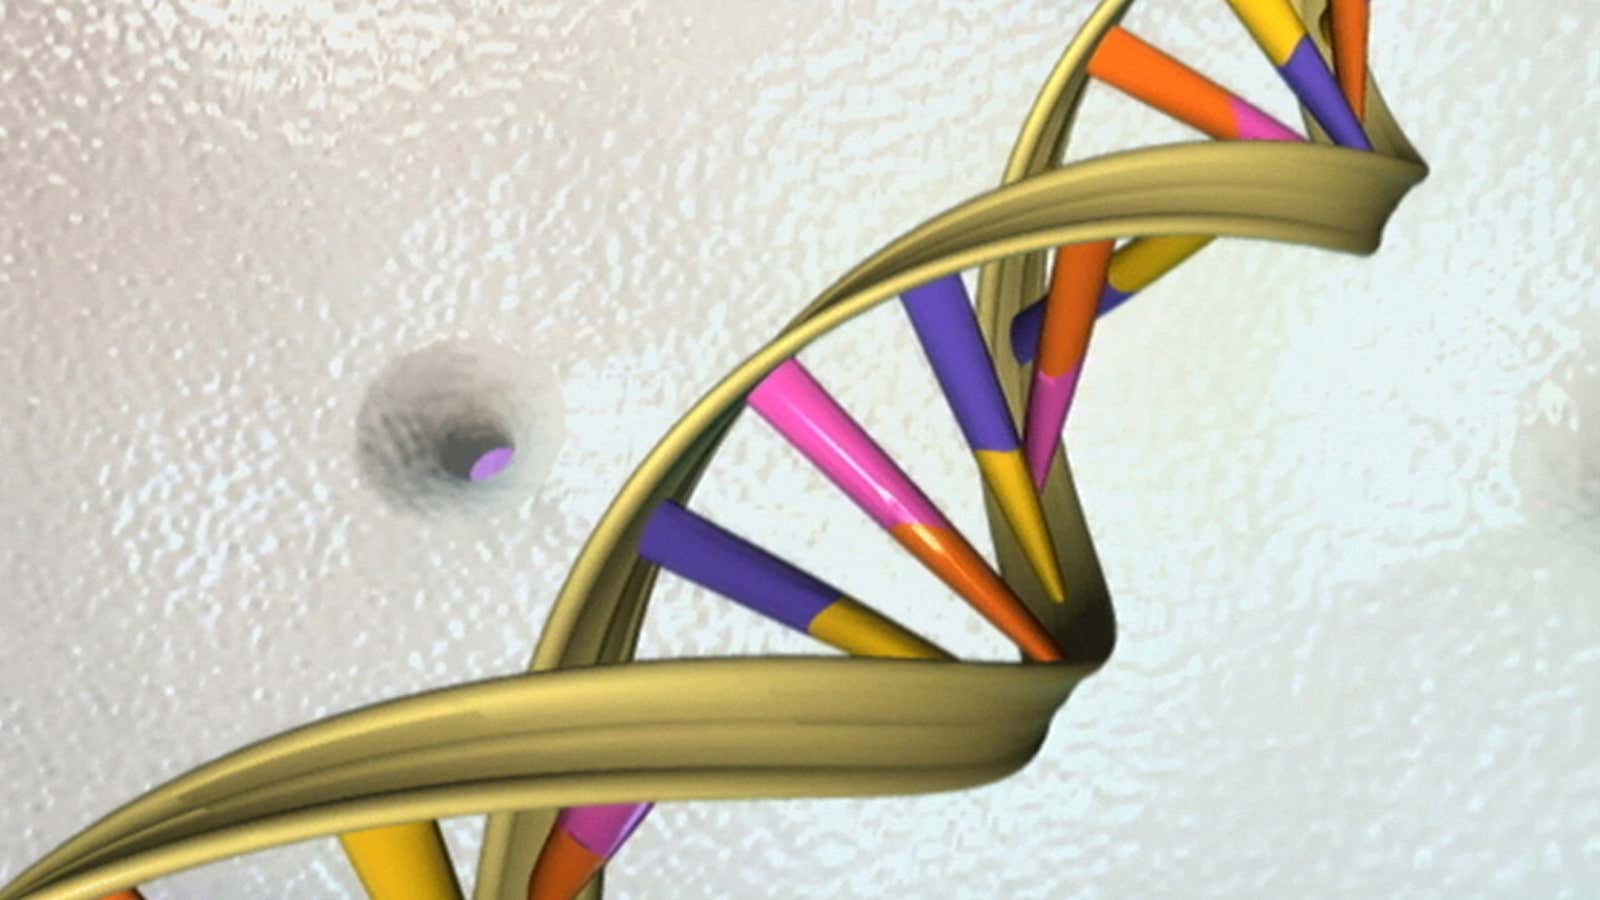 A DNA double helix is seen in an undated artist’s illustration